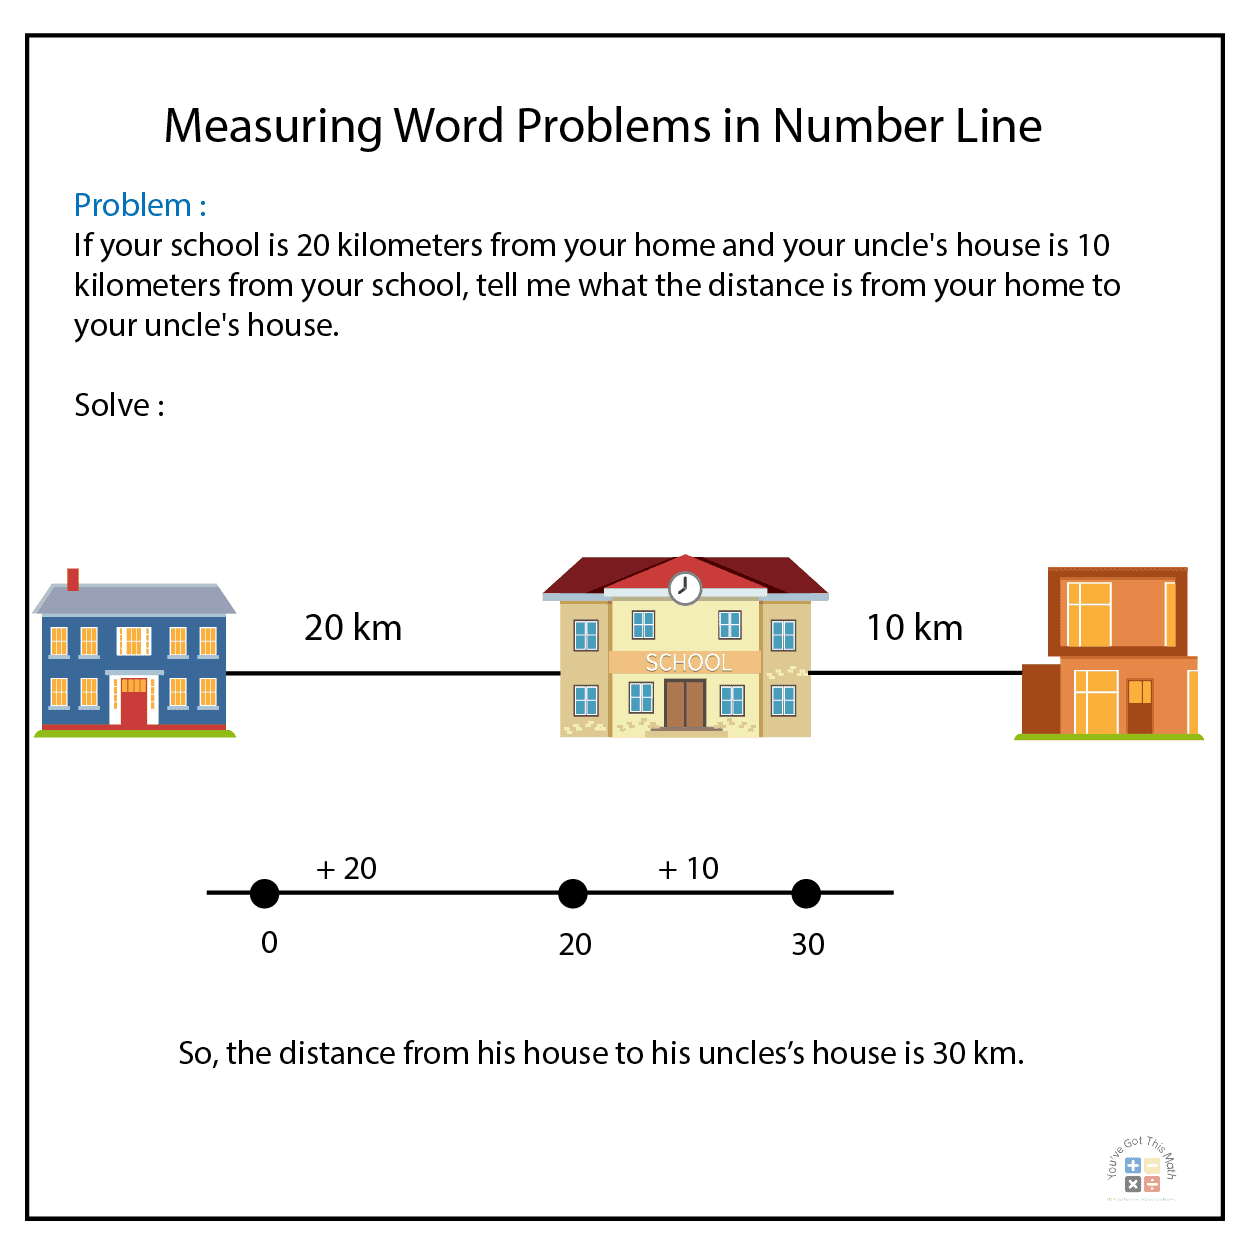 Measuring Word Problems in Number Line